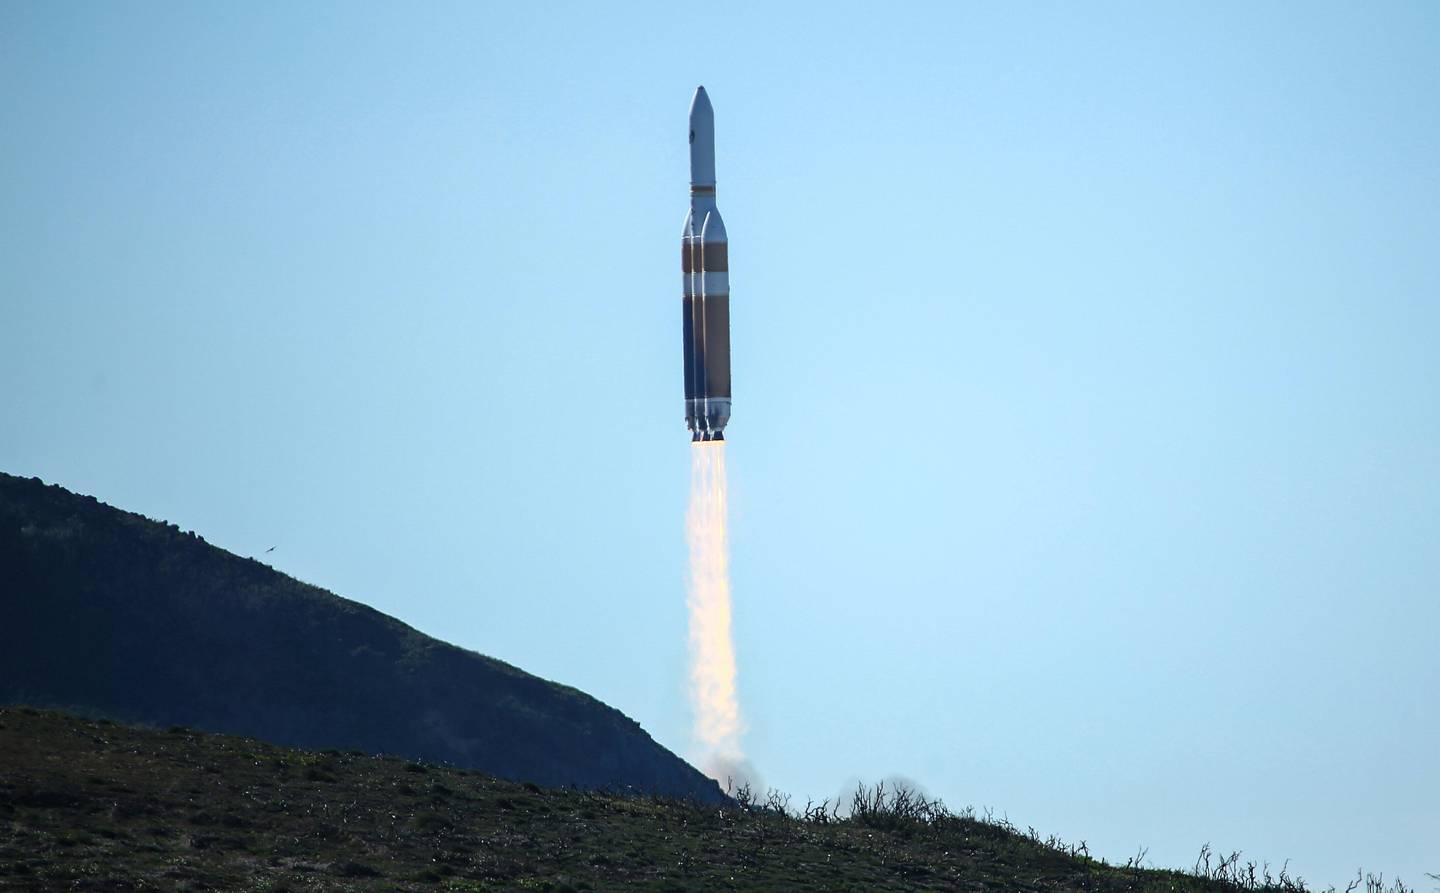 A powerful Delta 4 Heavy rocket carrying a U.S. spy satellite lifts off from Vandenberg Air Force Base in Calif., Saturday, Jan. 19, 2019. The rocket propelled the National Reconnaissance Office satellite at 11:10 a.m. Pacific time, arcing over the Pacific Ocean west of Los Angeles as it headed toward space. The United Launch Alliance Delta 4 Heavy is made up of 3 rocket cores strapped together producing almost 2.2 million pounds of thrust at lift-off. (AP Photo/Matt Hartman)